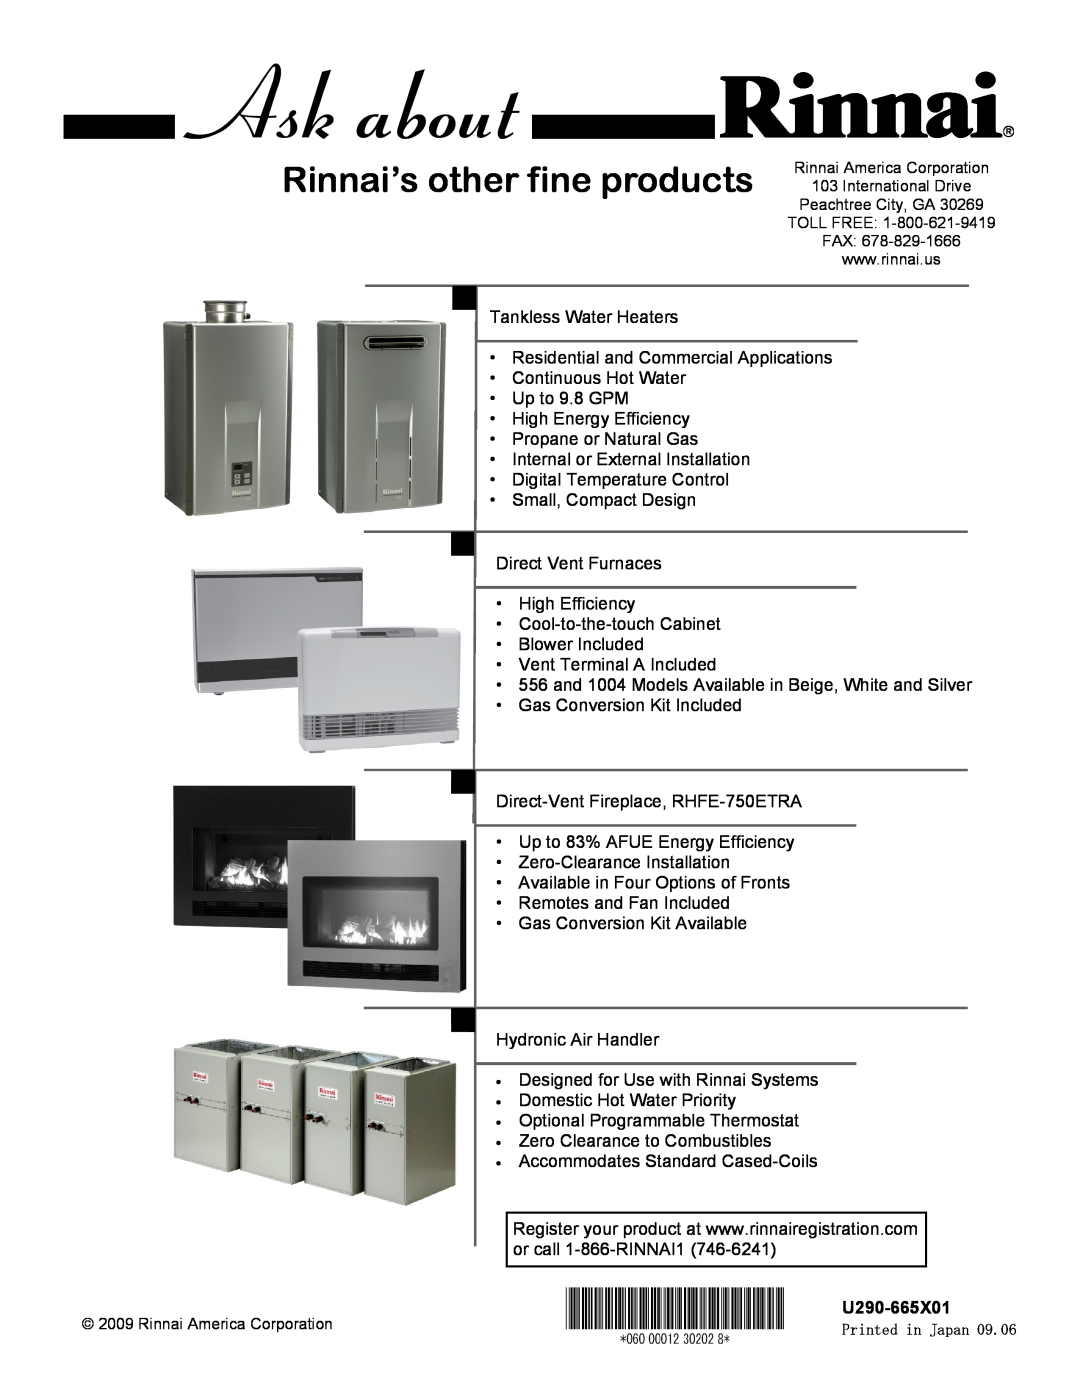 Rinnai RC98HPE, RC80HPI, RC80HPE, RC98HPI installation manual Rinnai’s other fine products, U290-665X01 